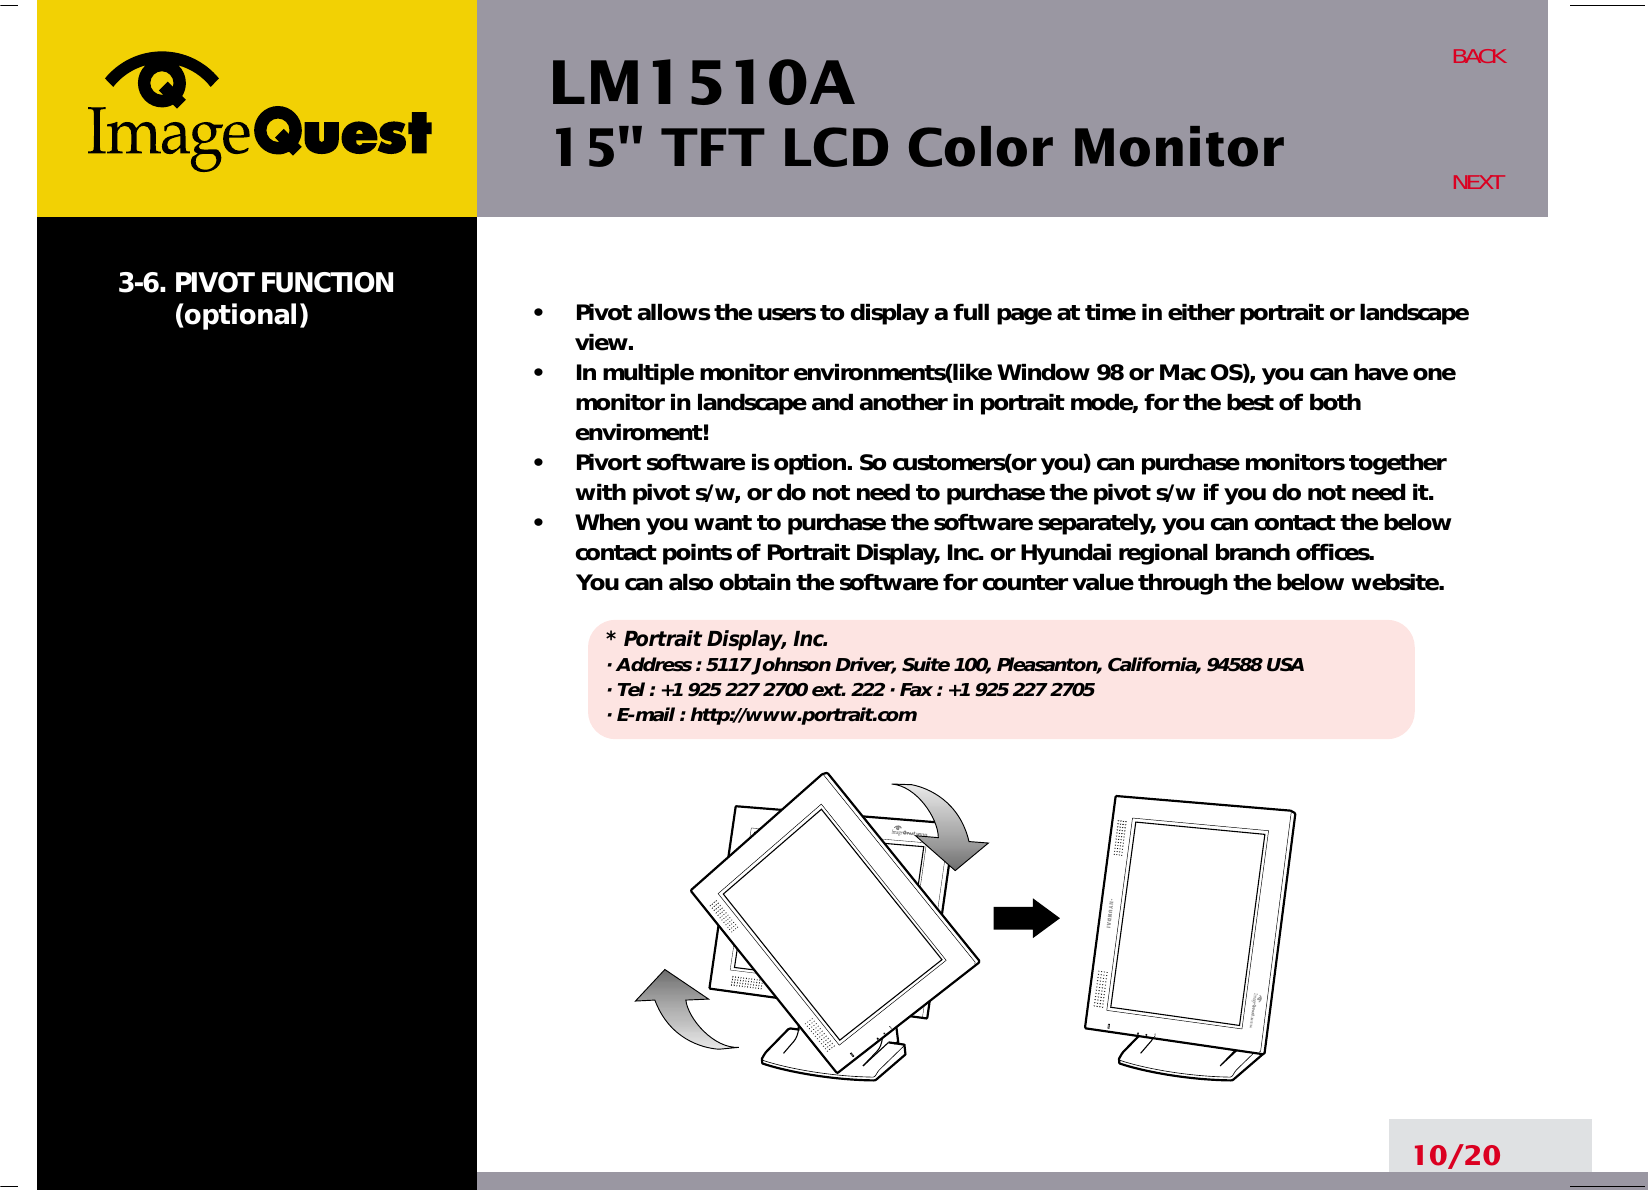 LM1510A15&quot; TFT LCD Color Monitor3-6. PIVOT FUNCTION(optional)•     Pivot allows the users to display a full page at time in either portrait or landscapeview.•     In multiple monitor environments(like Window 98 or Mac OS), you can have onemonitor in landscape and another in portrait mode, for the best of bothenviroment!•     Pivort software is option. So customers(or you) can purchase monitors togetherwith pivot s/w, or do not need to purchase the pivot s/w if you do not need it.•     When you want to purchase the software separately, you can contact the belowcontact points of Portrait Display, Inc. or Hyundai regional branch offices.You can also obtain the software for counter value through the below website.* Portrait Display, Inc.· Address : 5117 Johnson Driver, Suite 100, Pleasanton, California, 94588 USA· Tel : +1 925 227 2700 ext. 222 · Fax : +1 925 227 2705· E-mail : http://www.portrait.com10/20BACKNEXT